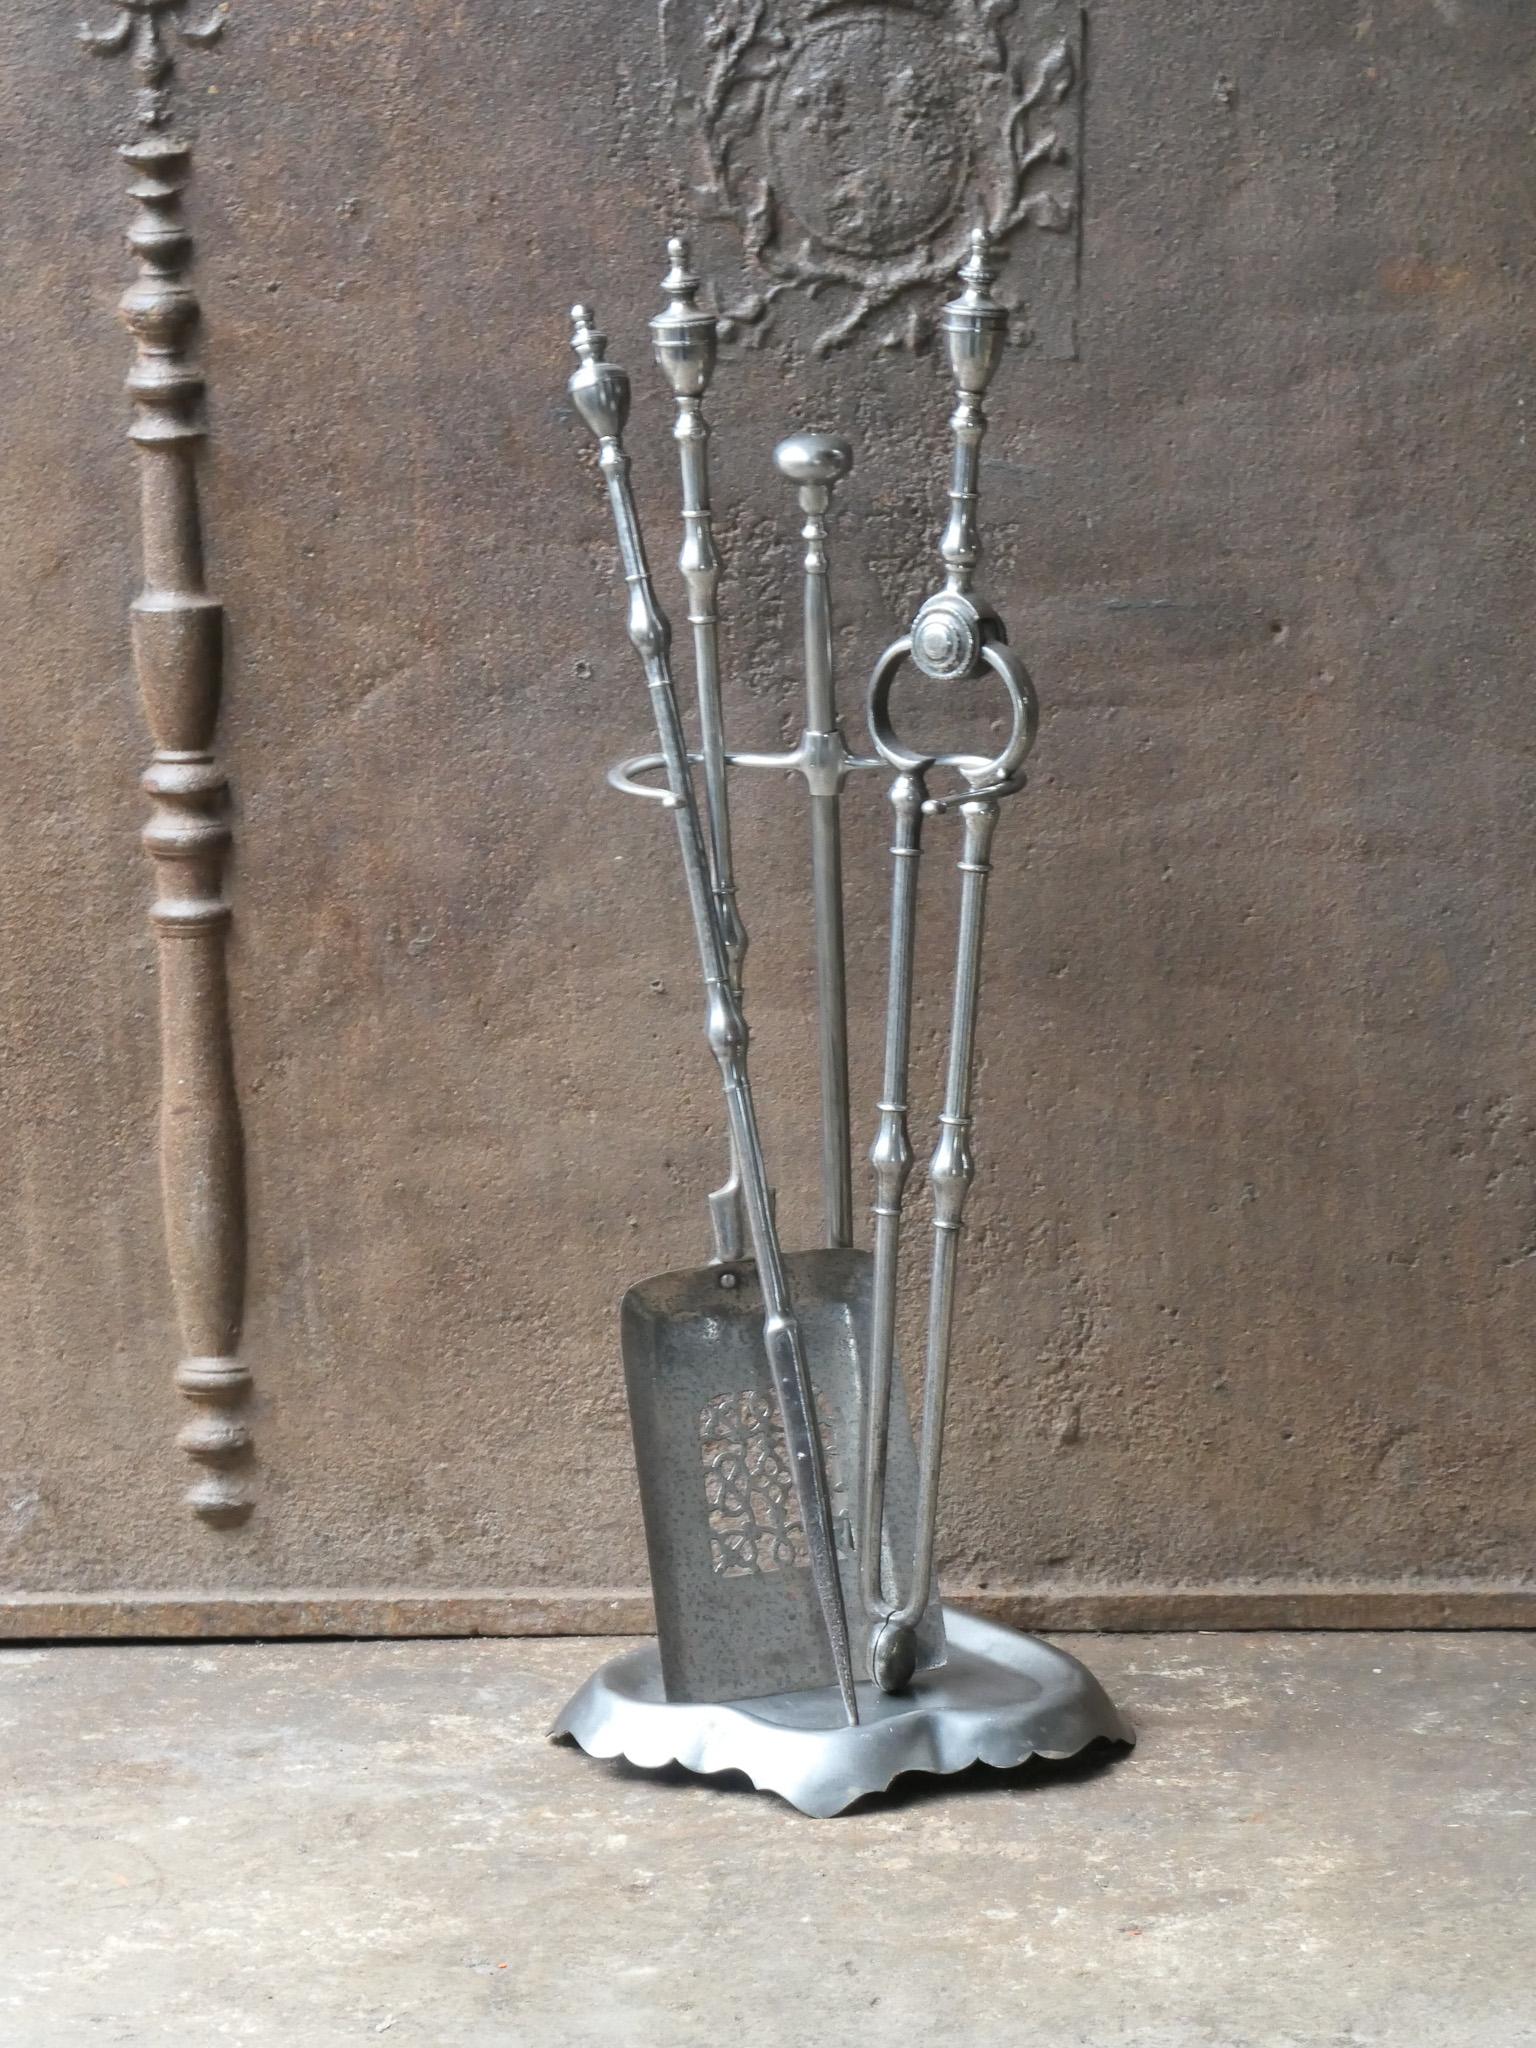 18th - 19th century English Georgian period fireplace toolset. It is made of polished steel. The toolset consists of three fire irons and a stand. The condition is good.













 